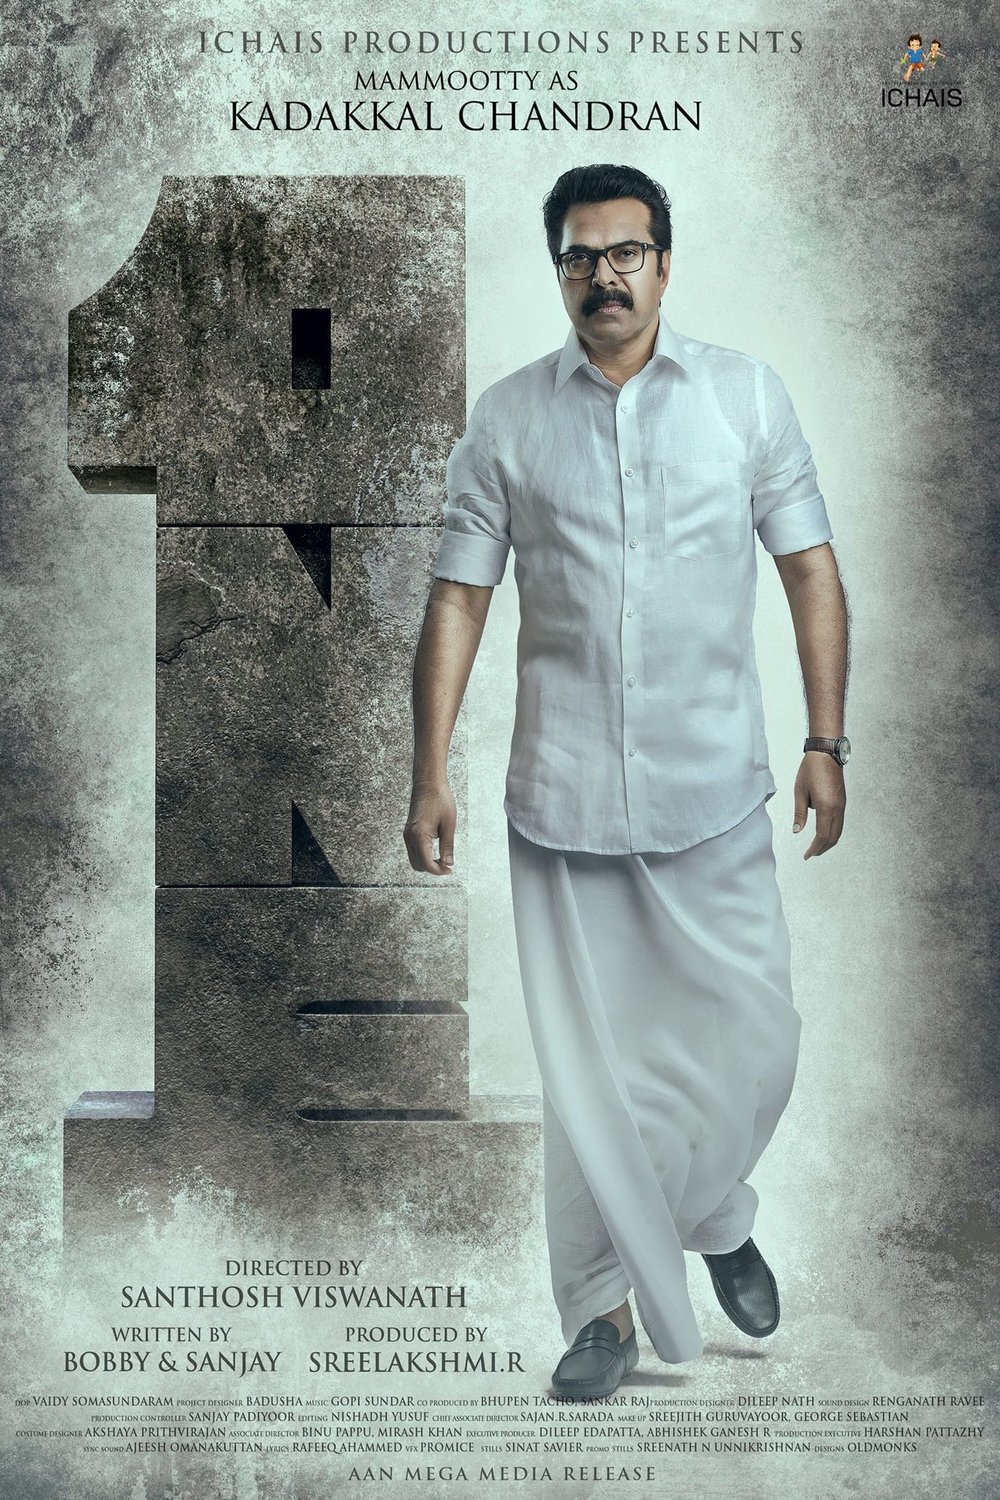 Malayalam poster of the movie One